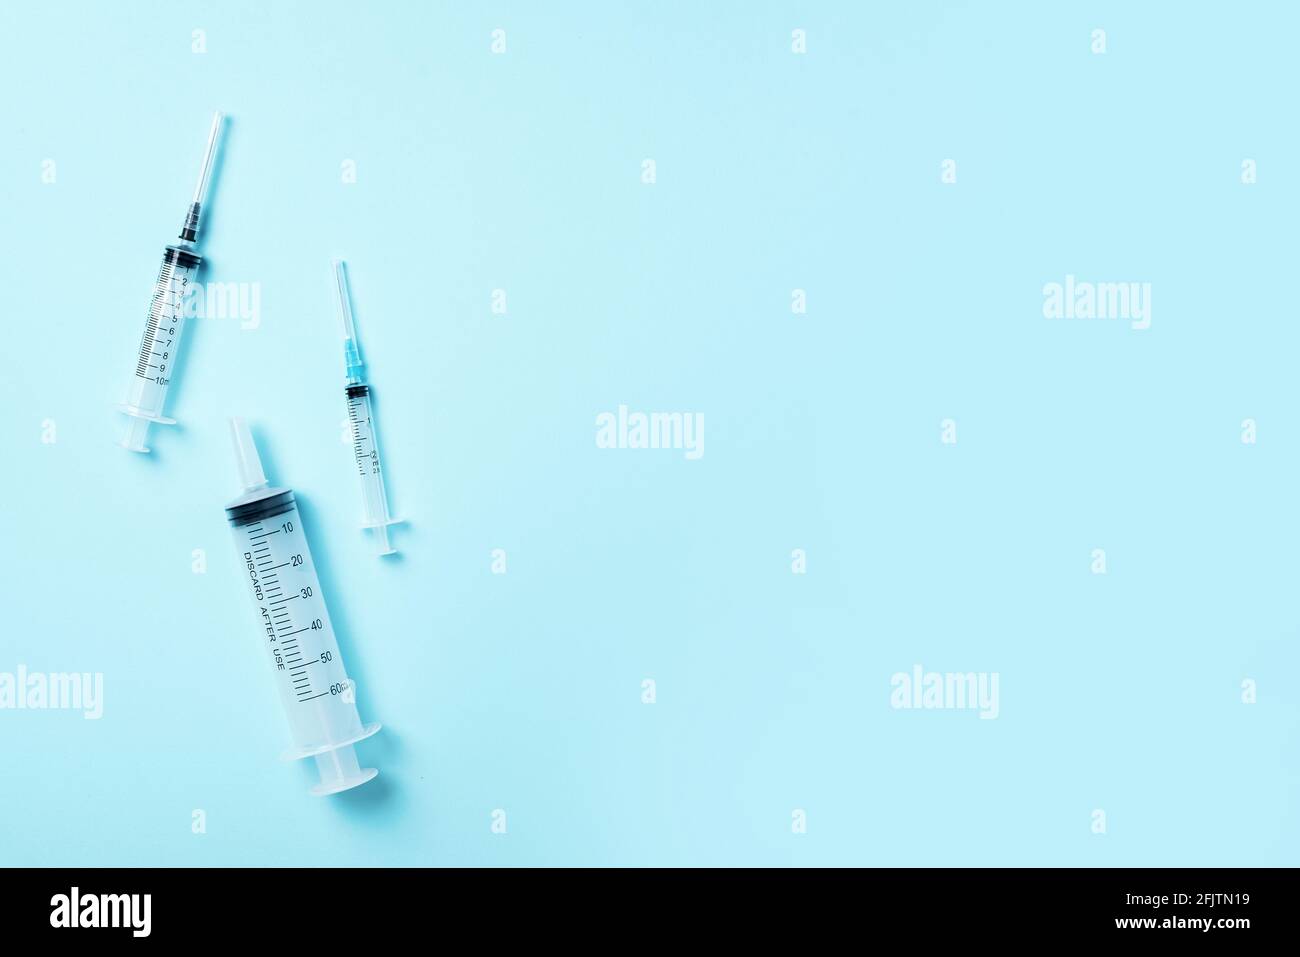 Syringes of different size on blue background. Injections and vaccination concept. Health protection medicine equipment during quarantine Coronavirus Stock Photo